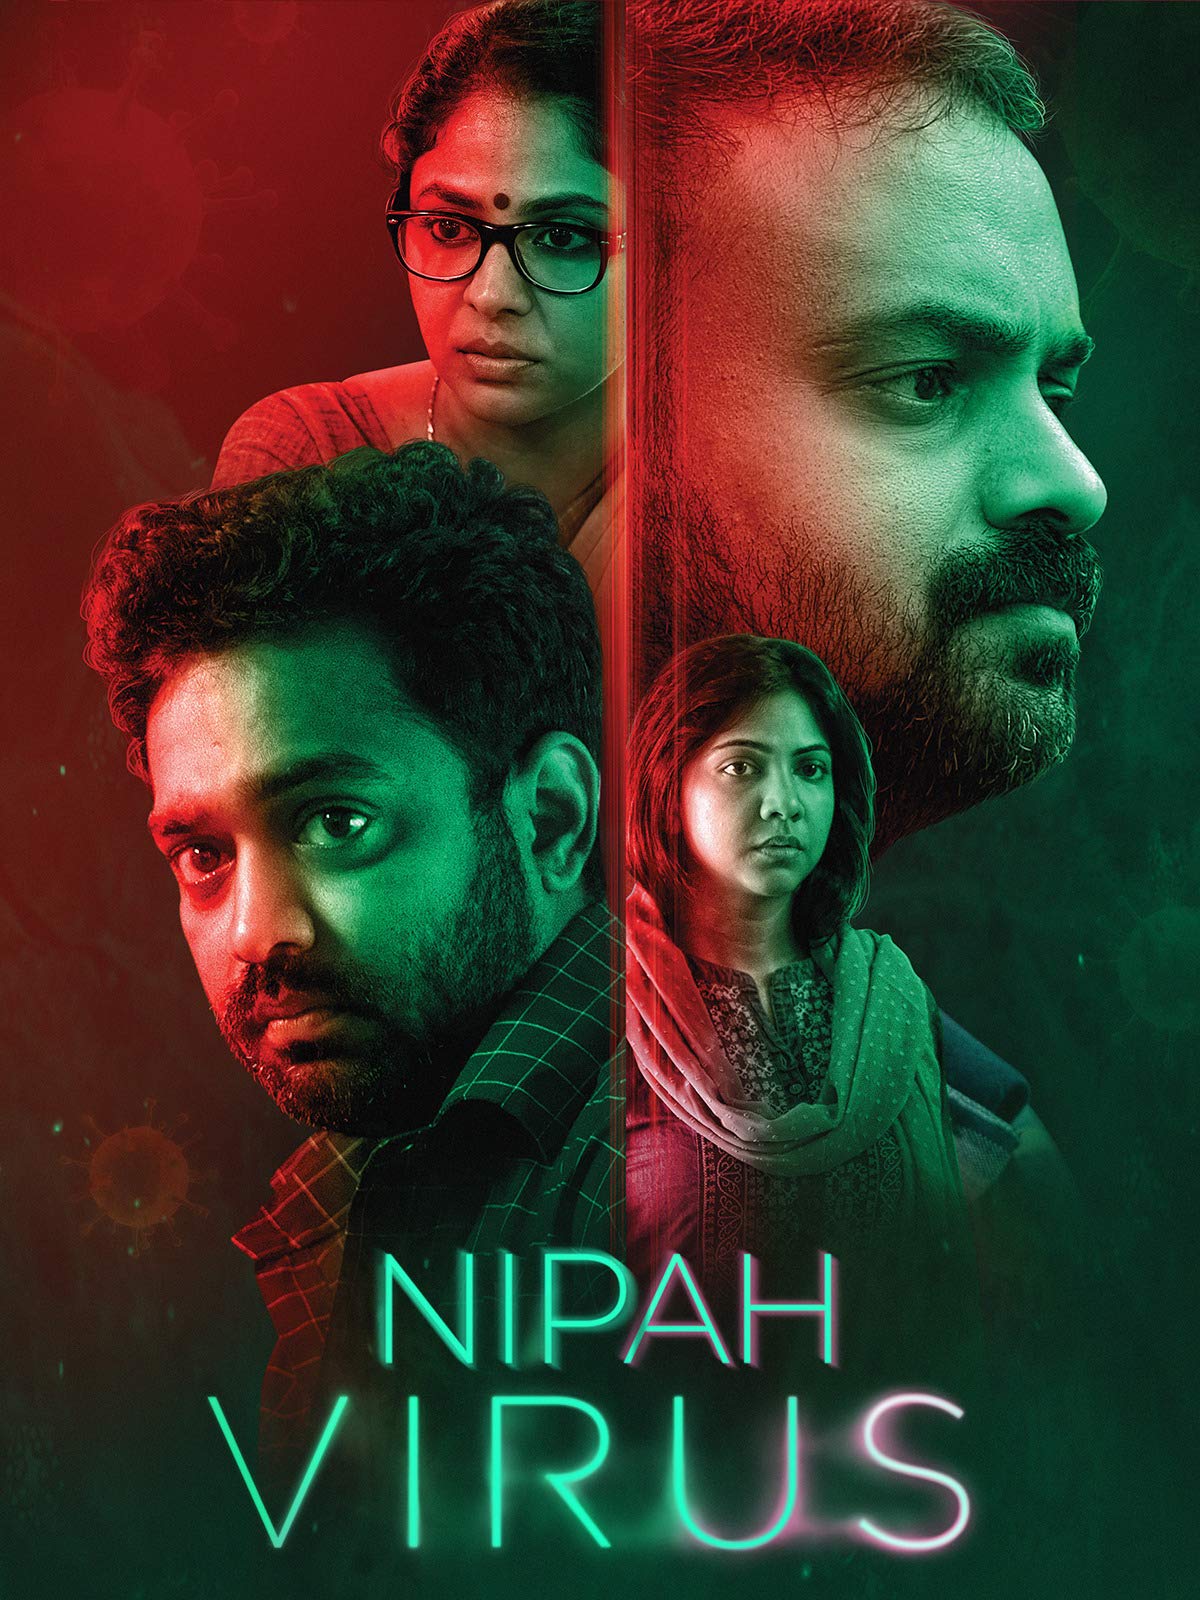 You are currently viewing Nipah Virus 2020 Telugu Movie 720p HDRip 1.3GB Download & Watch Online